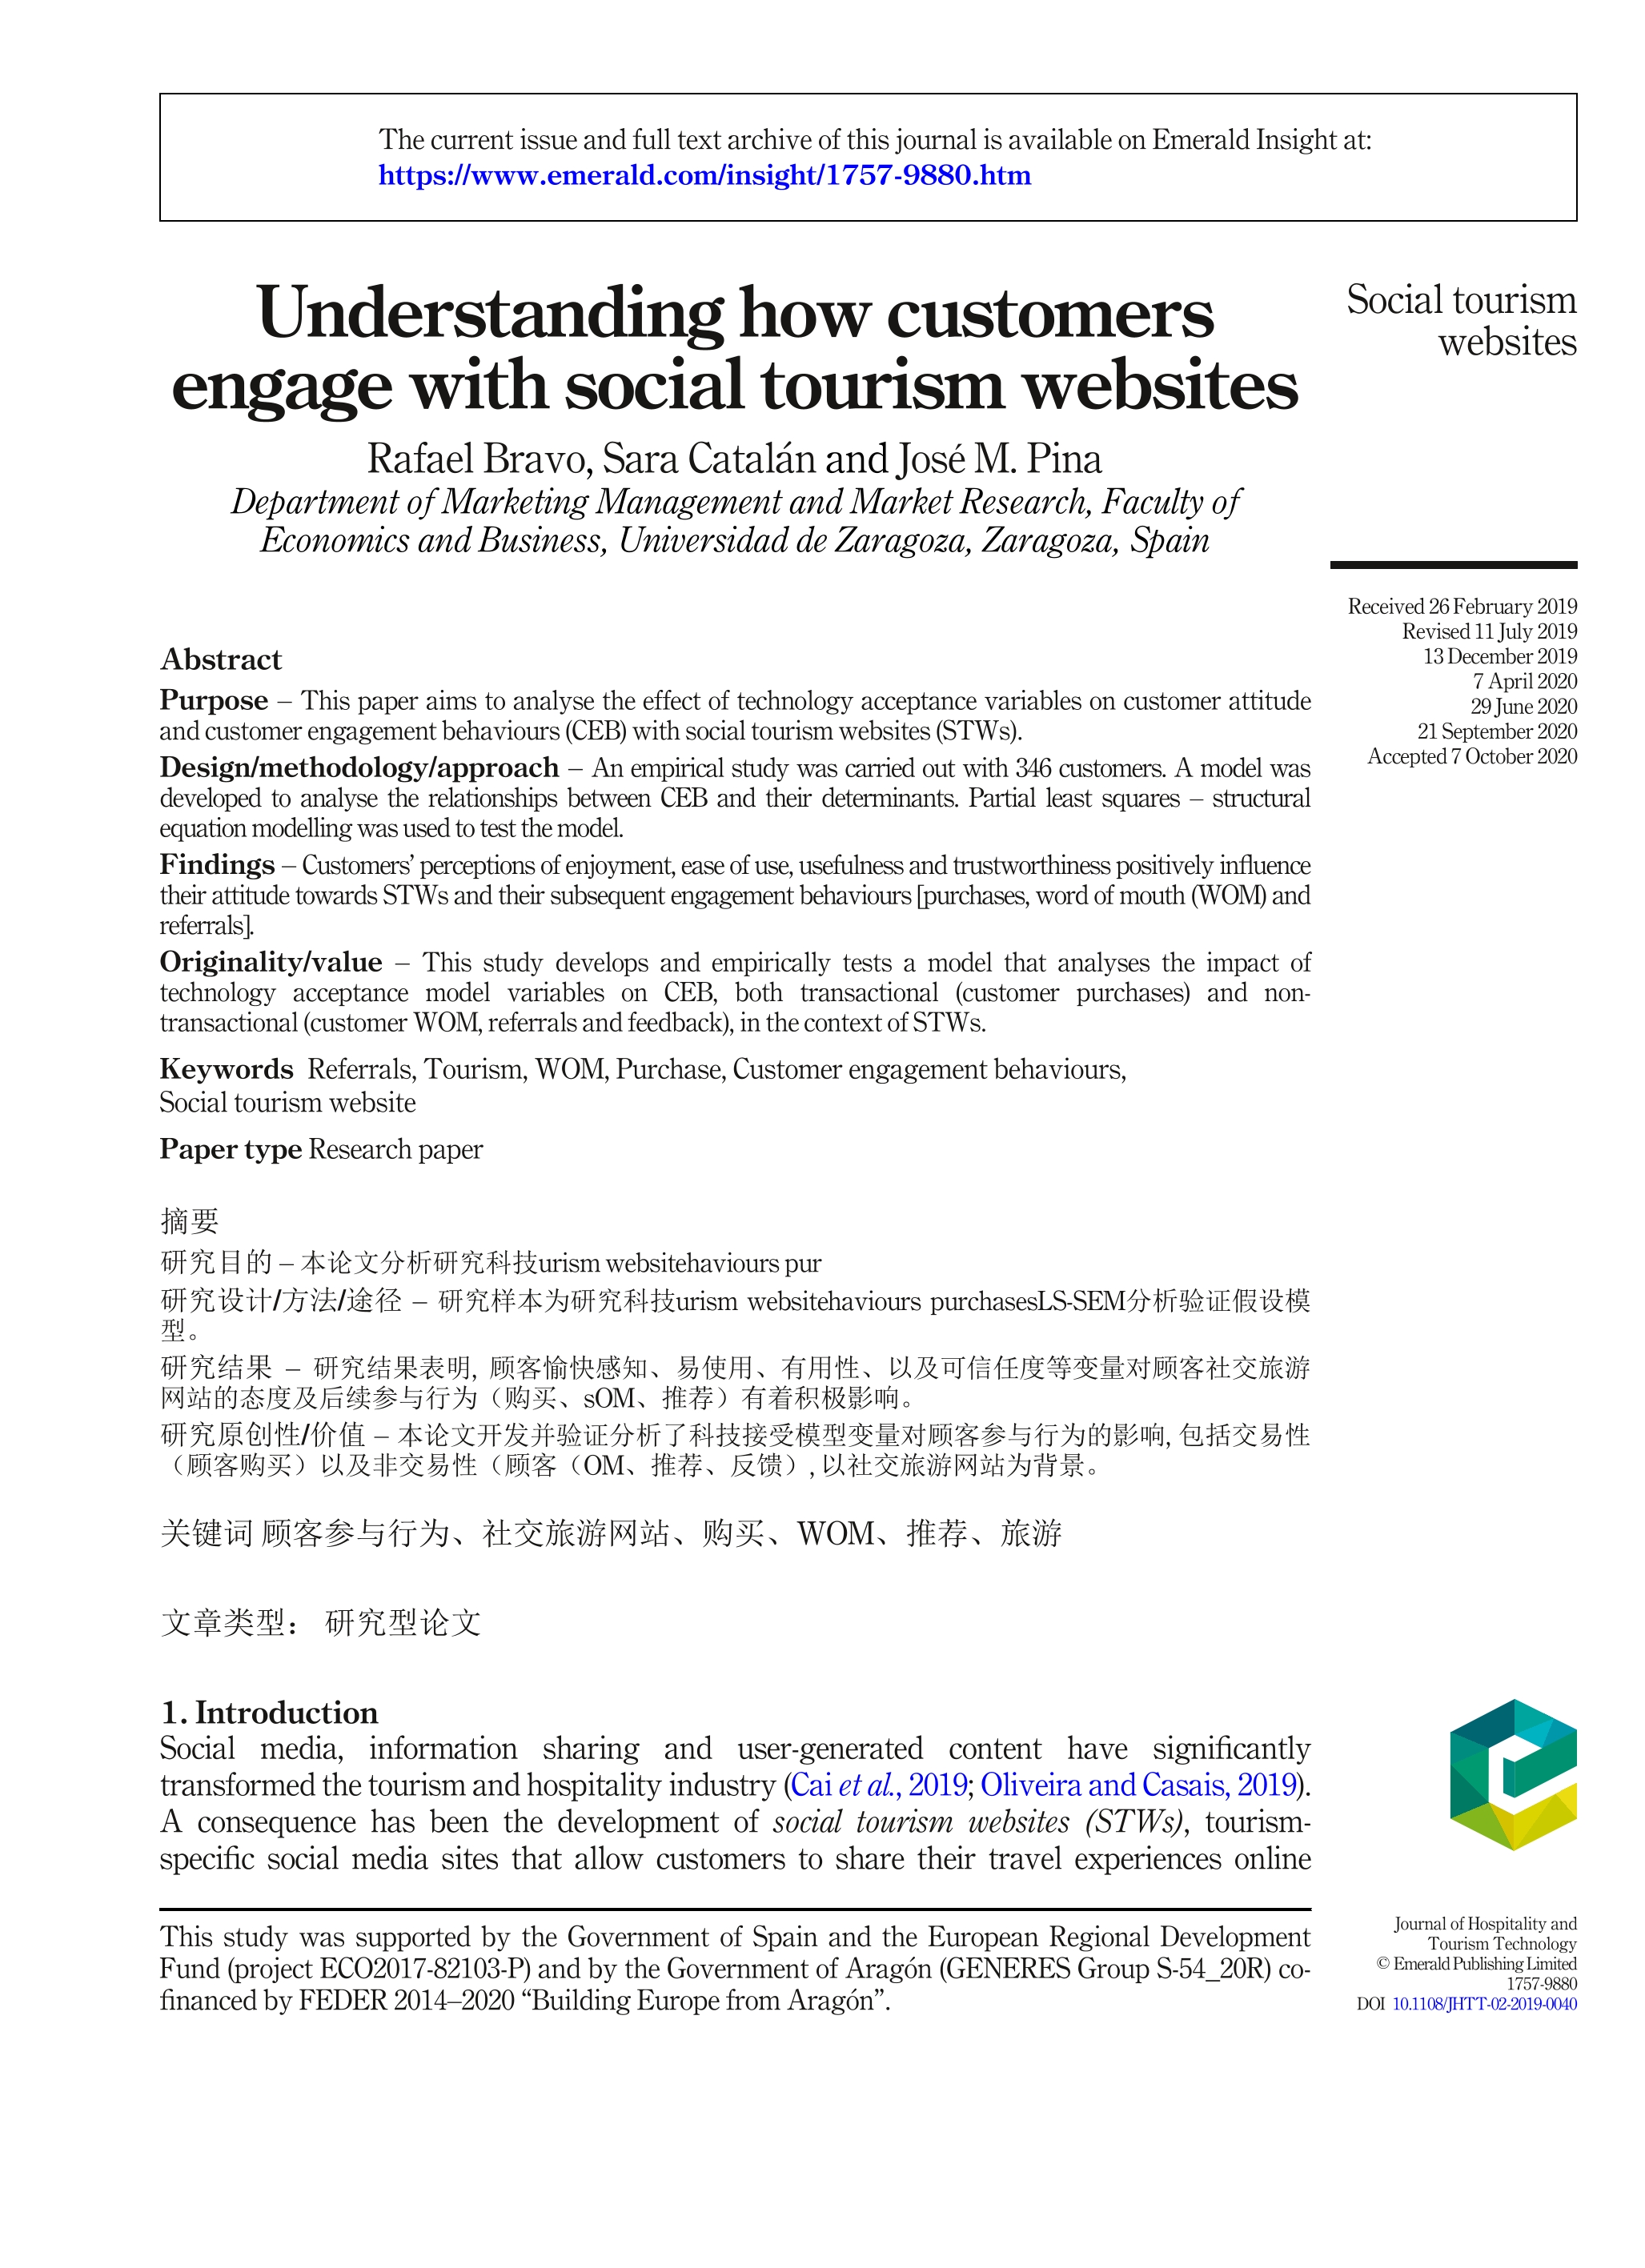 Understanding how customers engage with social tourism websites